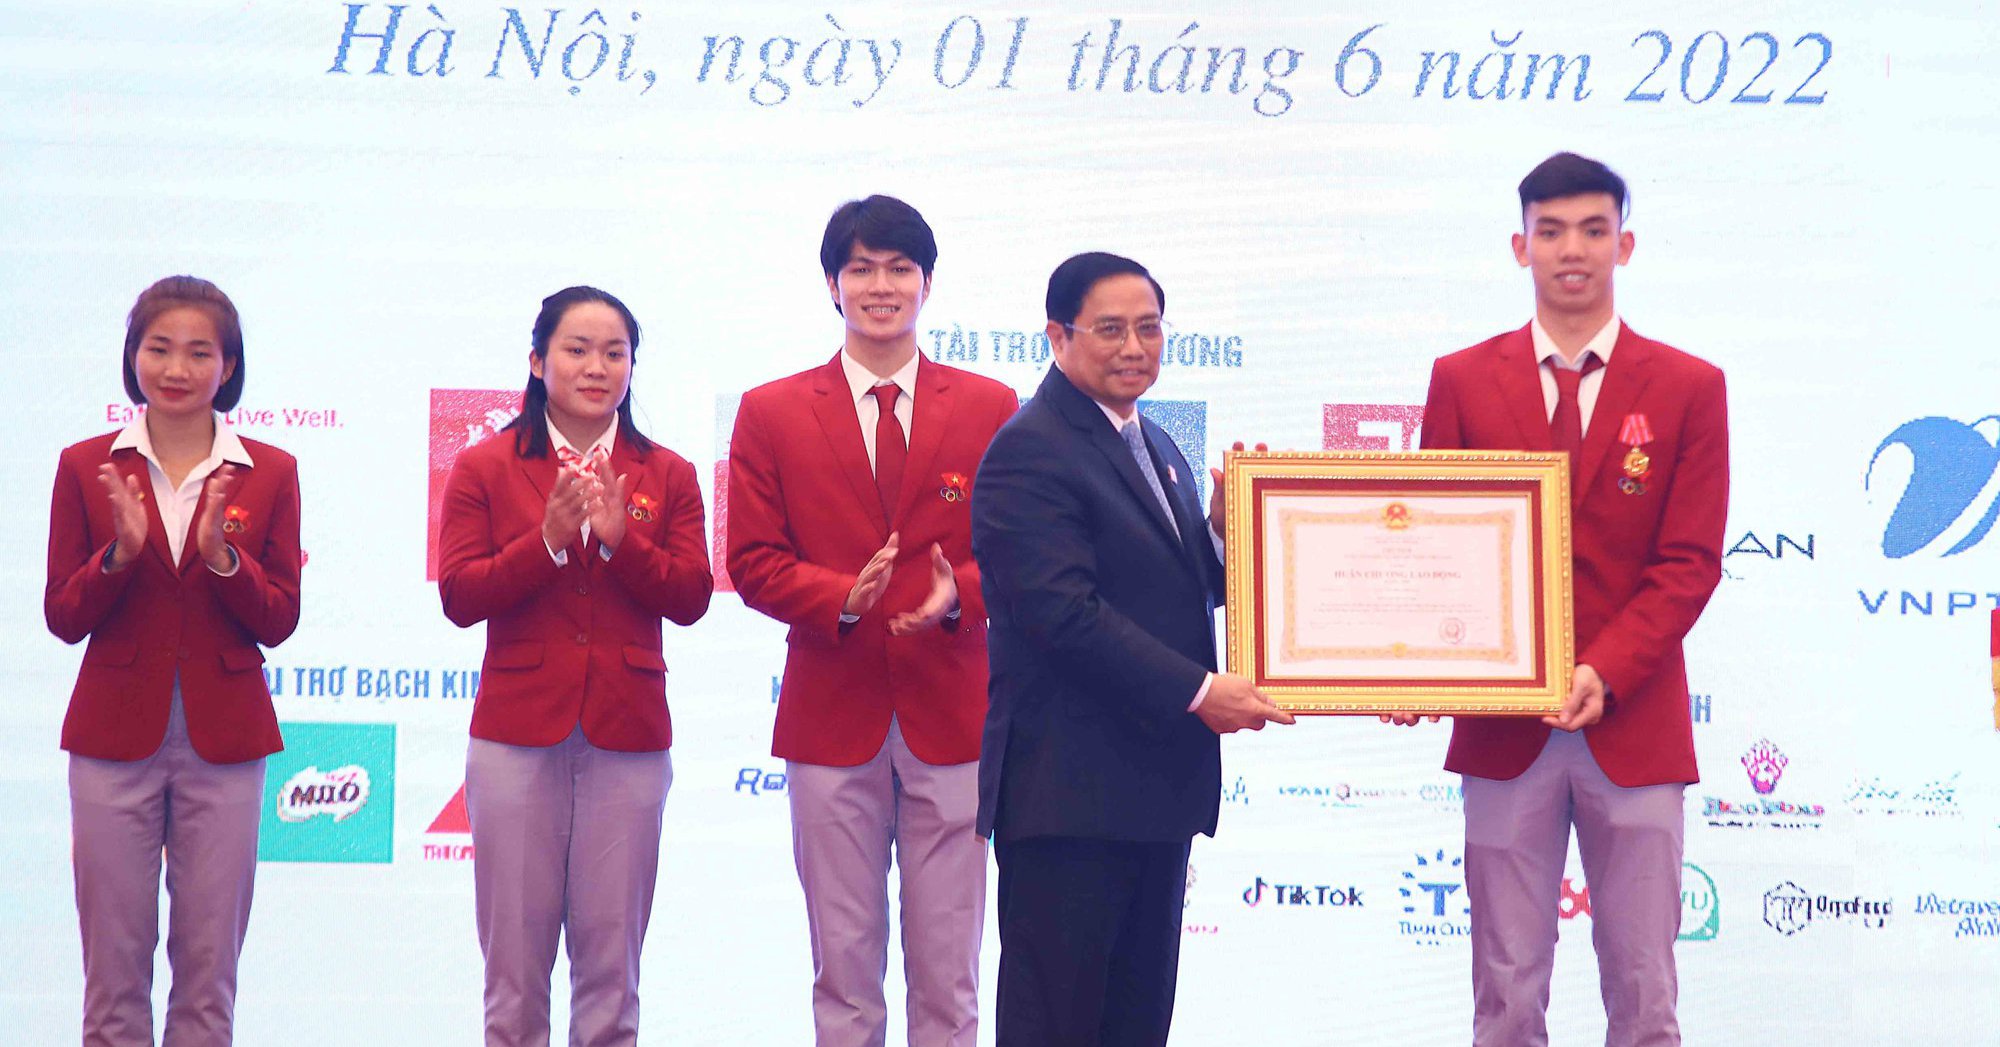 Prime Minister Pham Minh Chinh: “The Vietnamese Youth Union has shown great determination to surpass themselves”